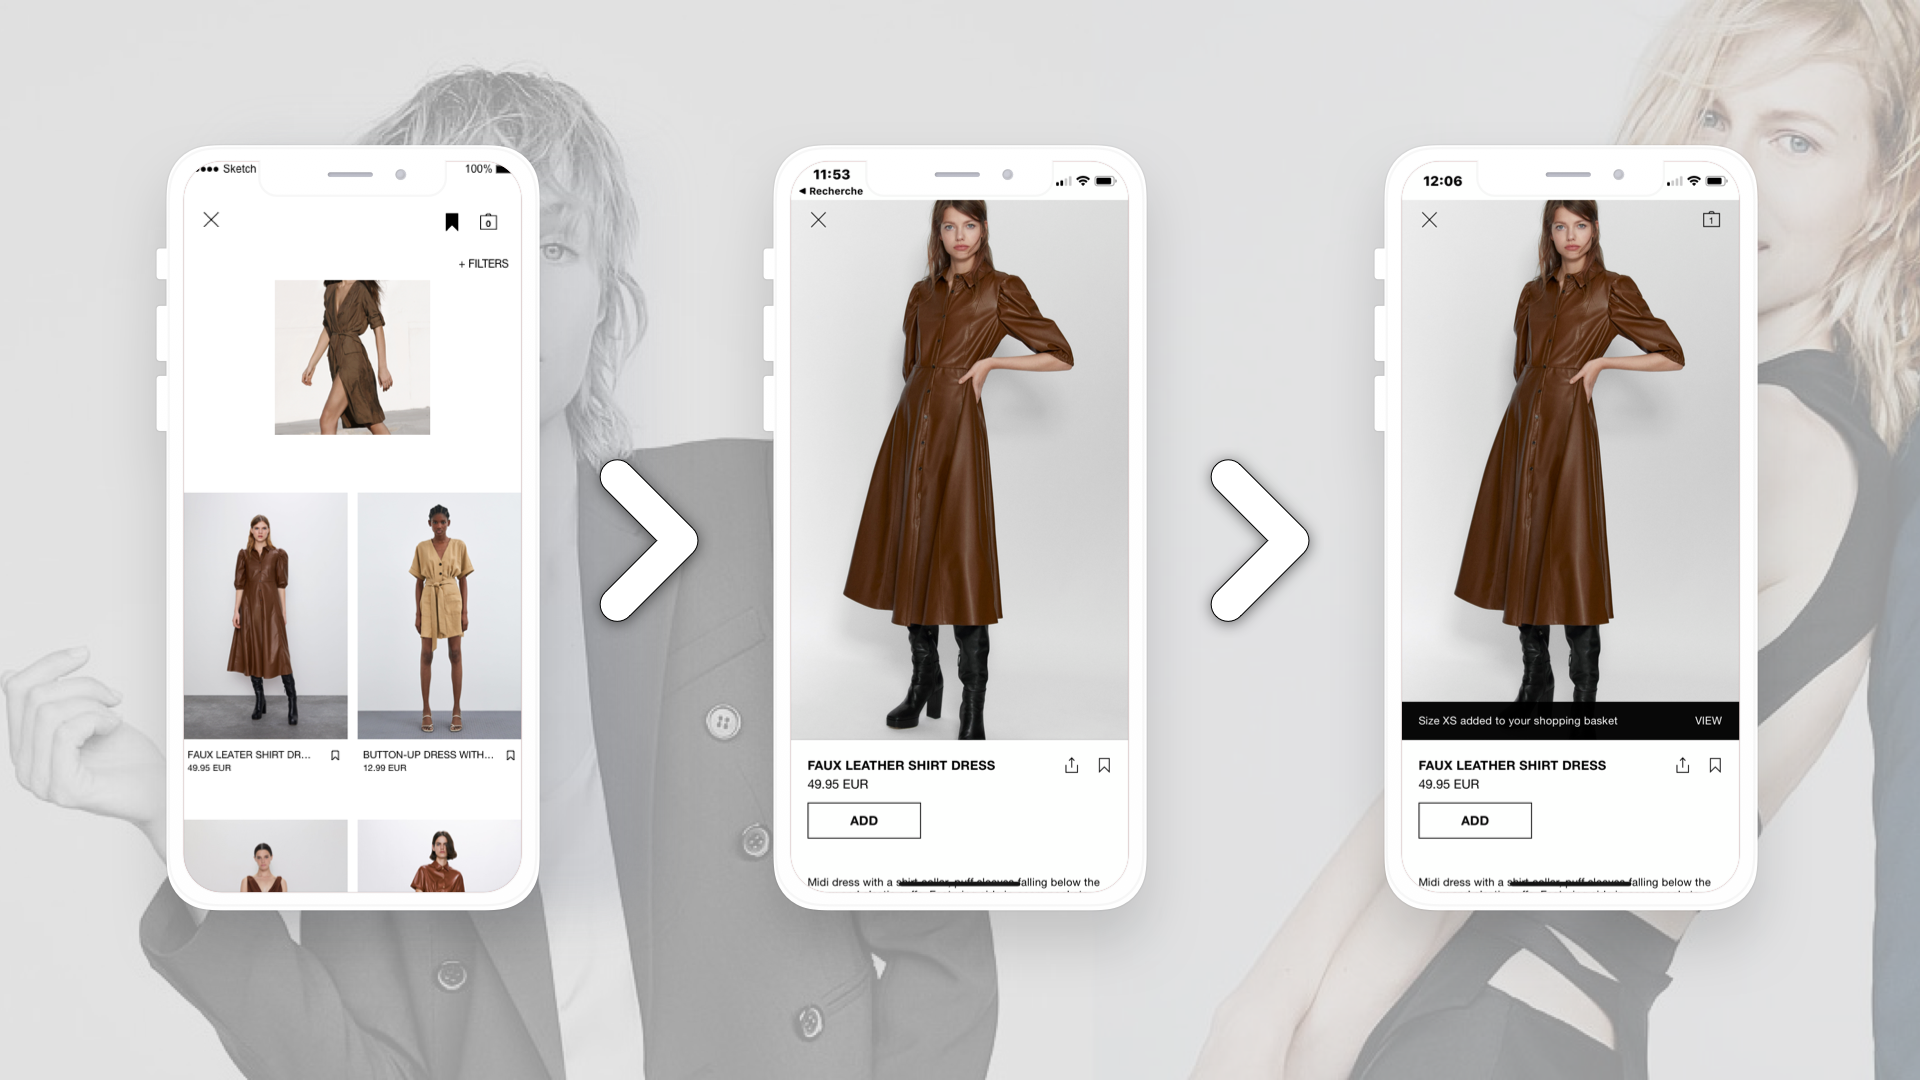 Zara app : A new feature to a further purchase experience | by Martin C. |  Medium